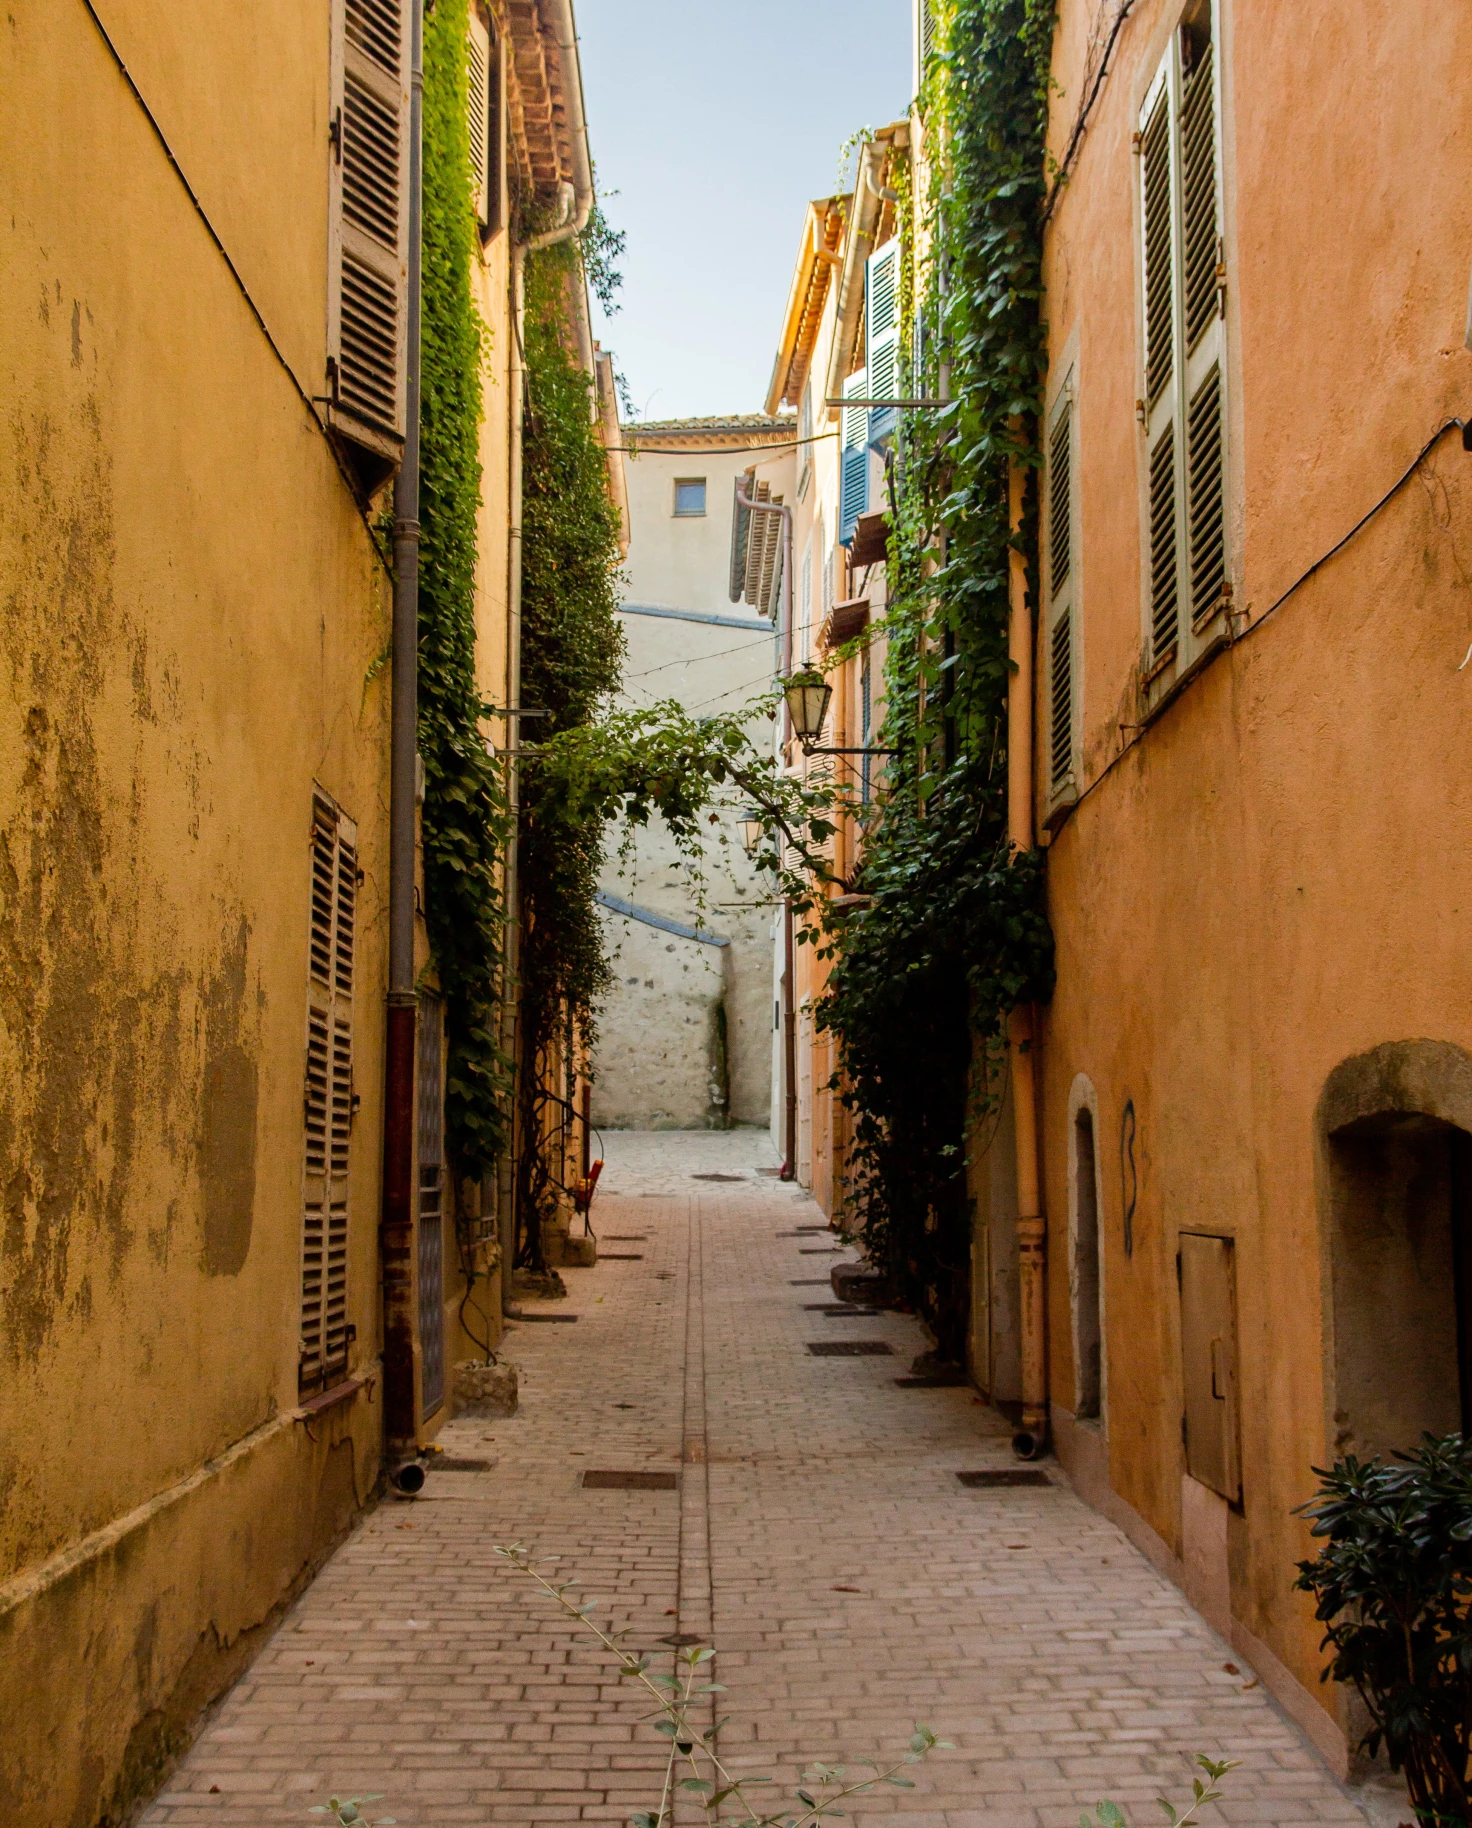 Empty pebble-stone street in Saint Tropez, flanked by yellow buildings and hanging ivy plants. 